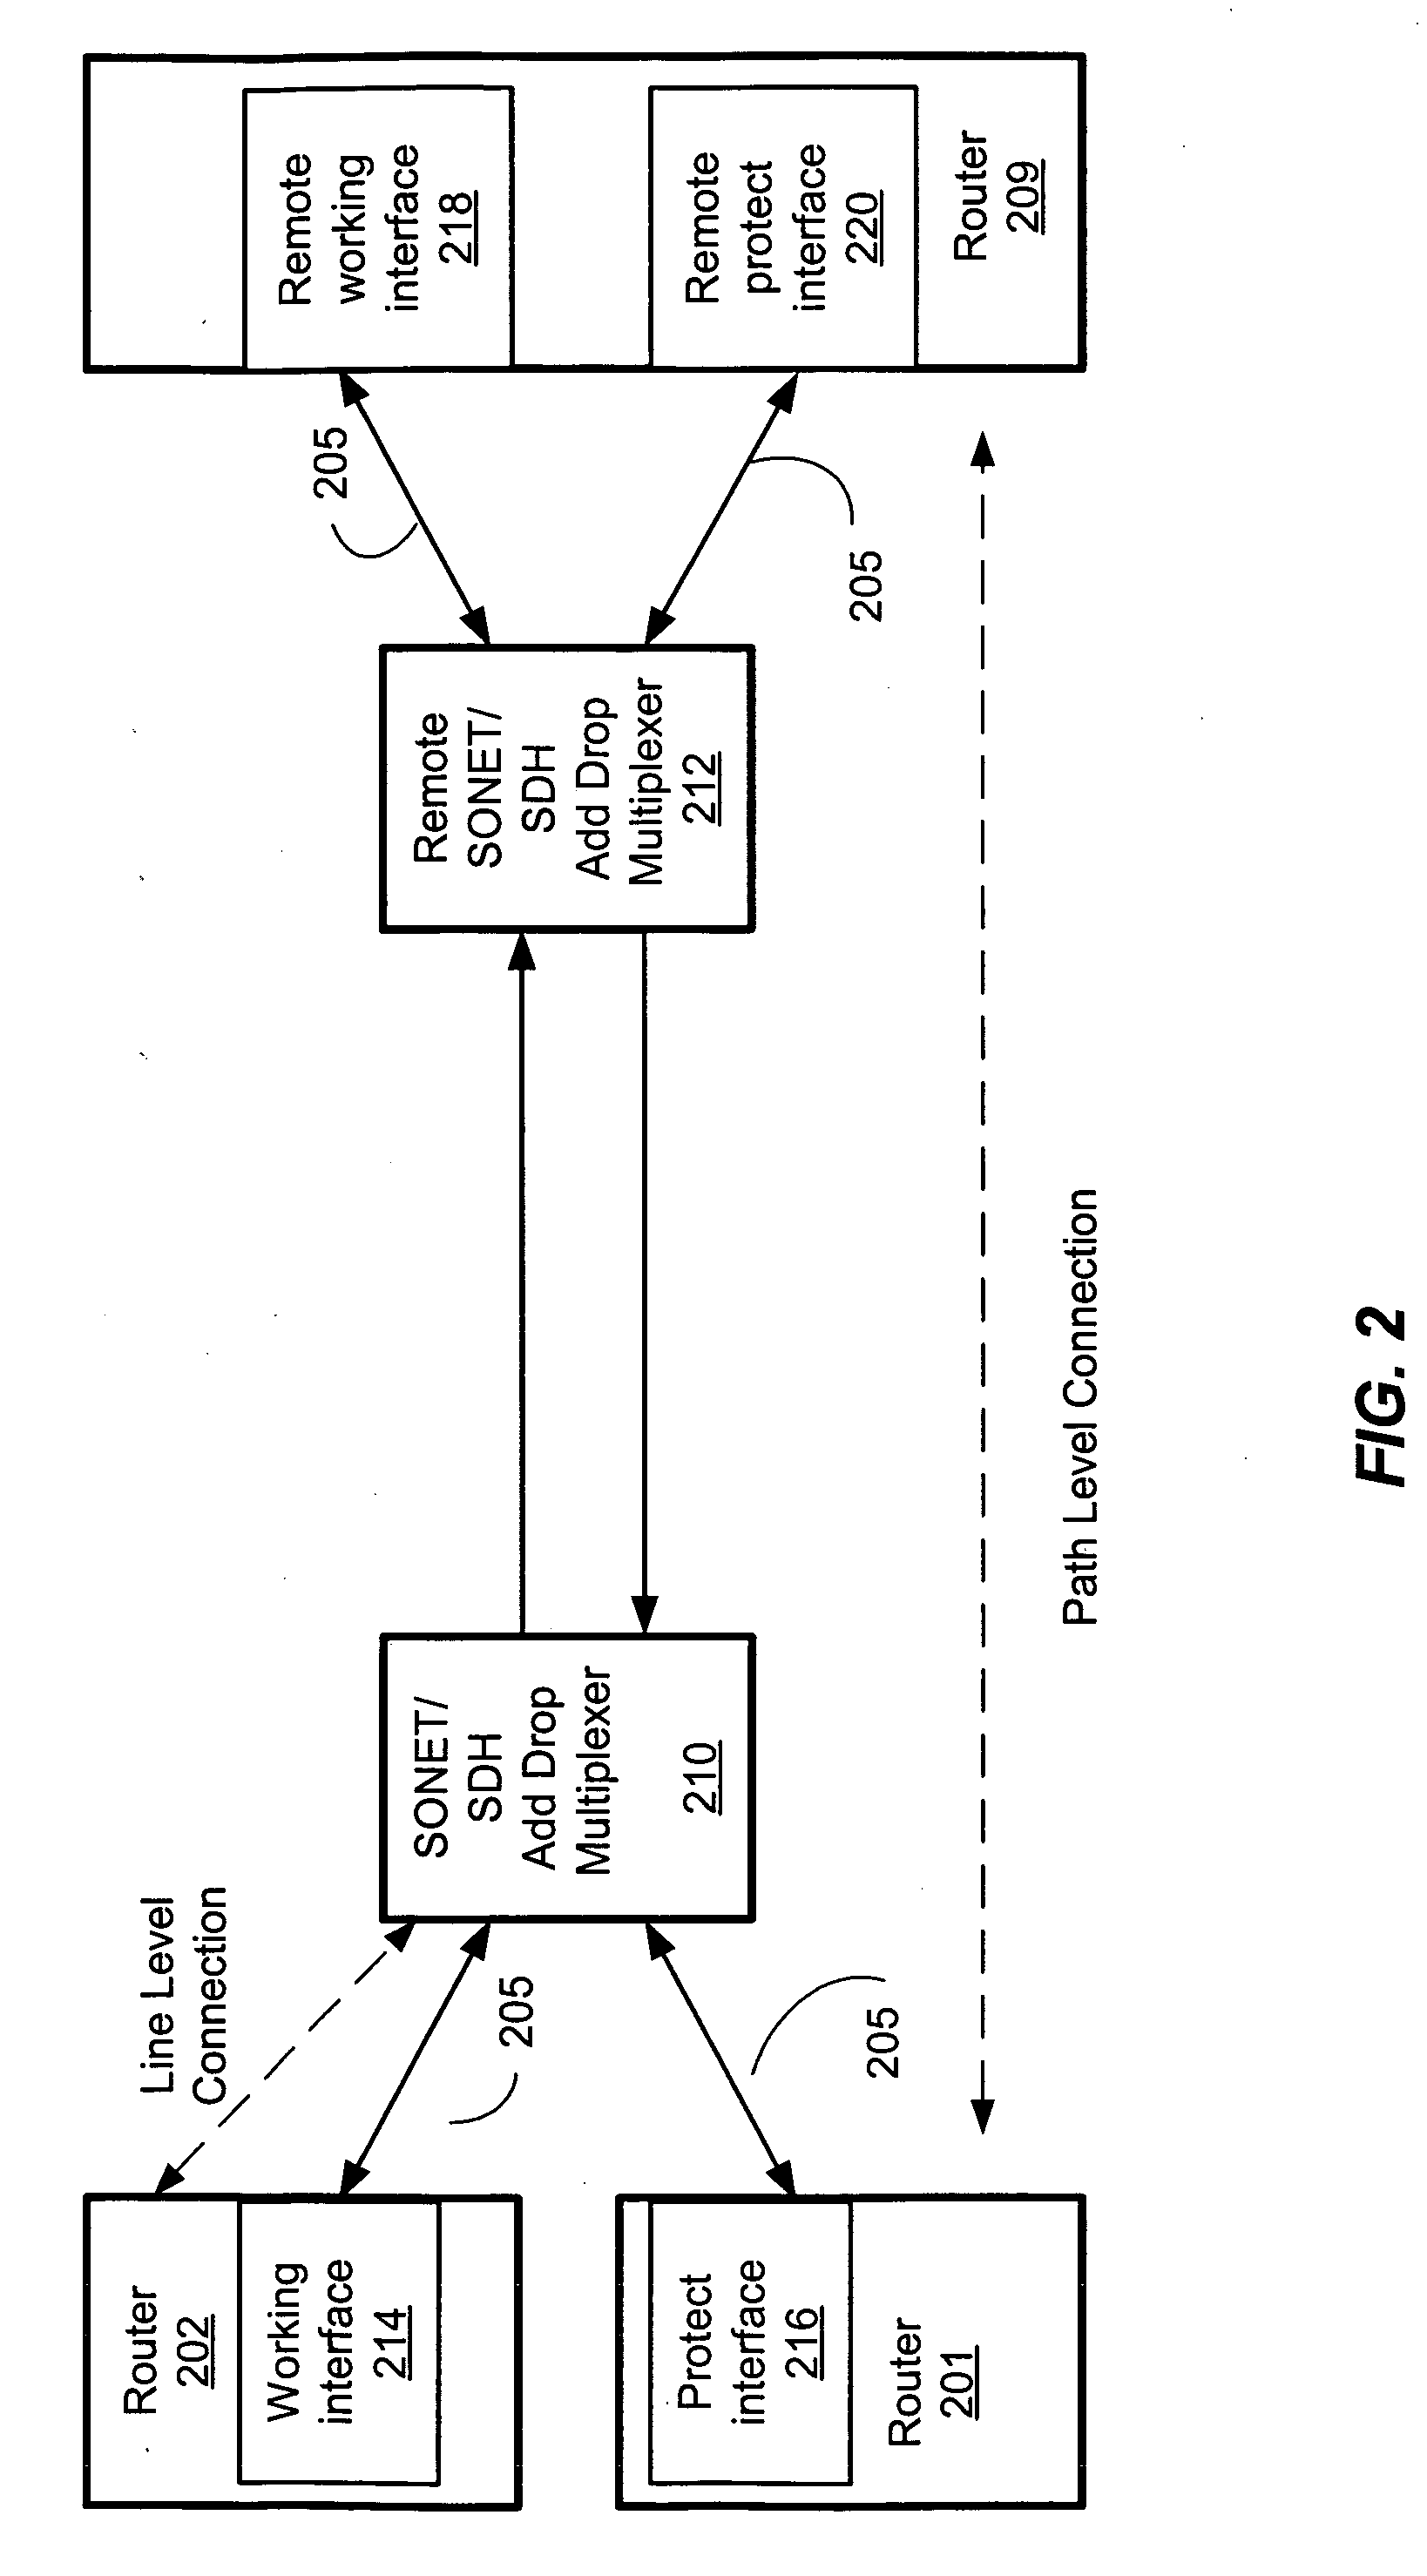 Mesh with protection channel access (MPCA)